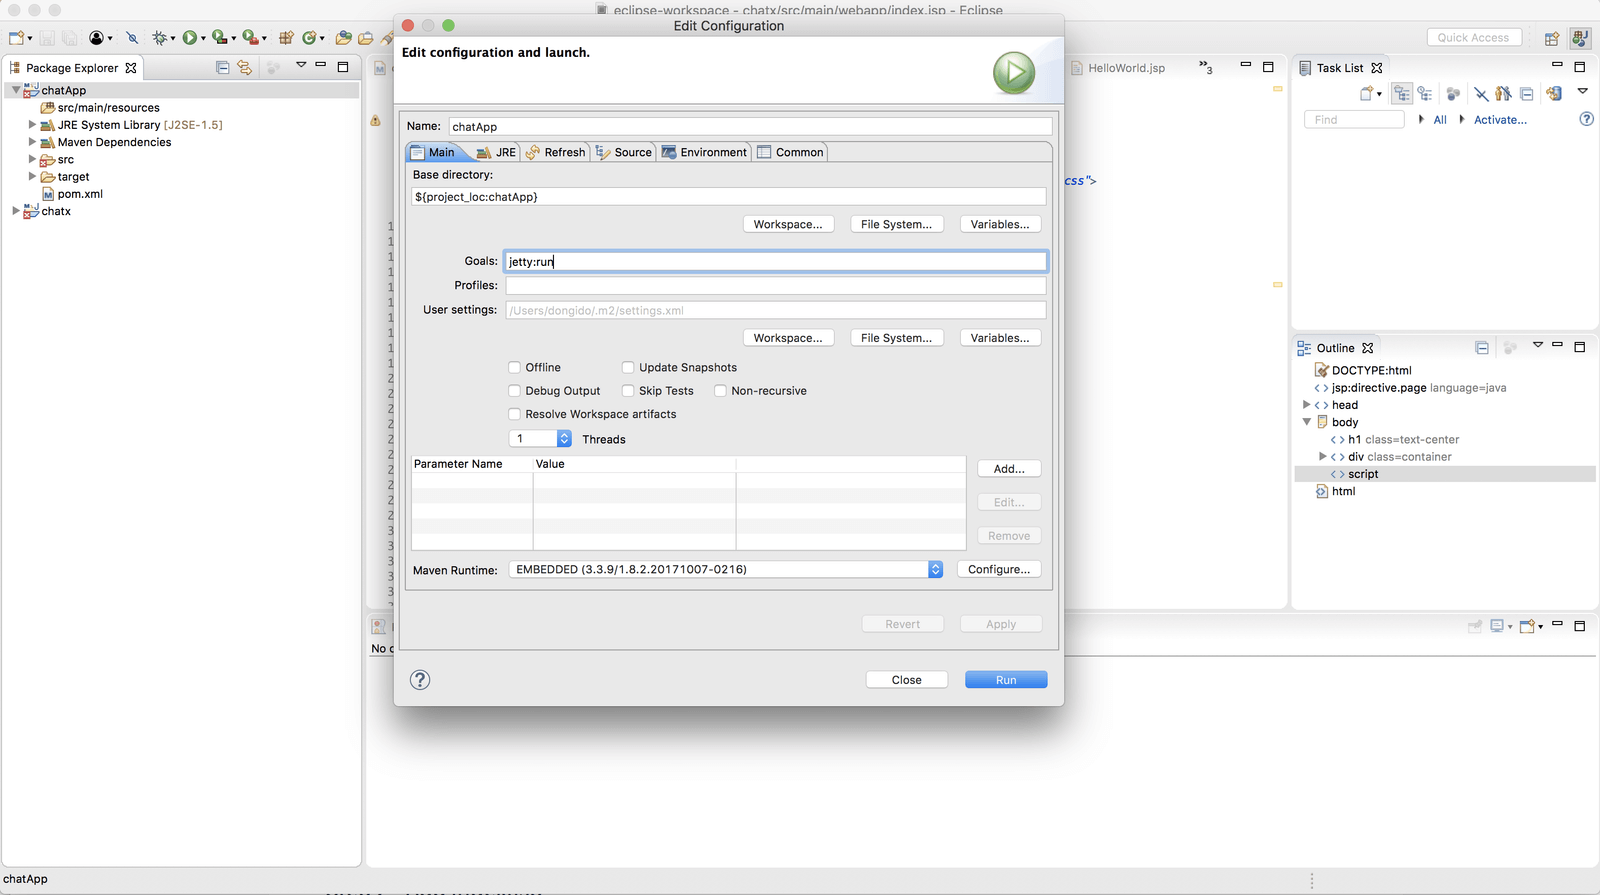 Configuring the Java app in Eclipse